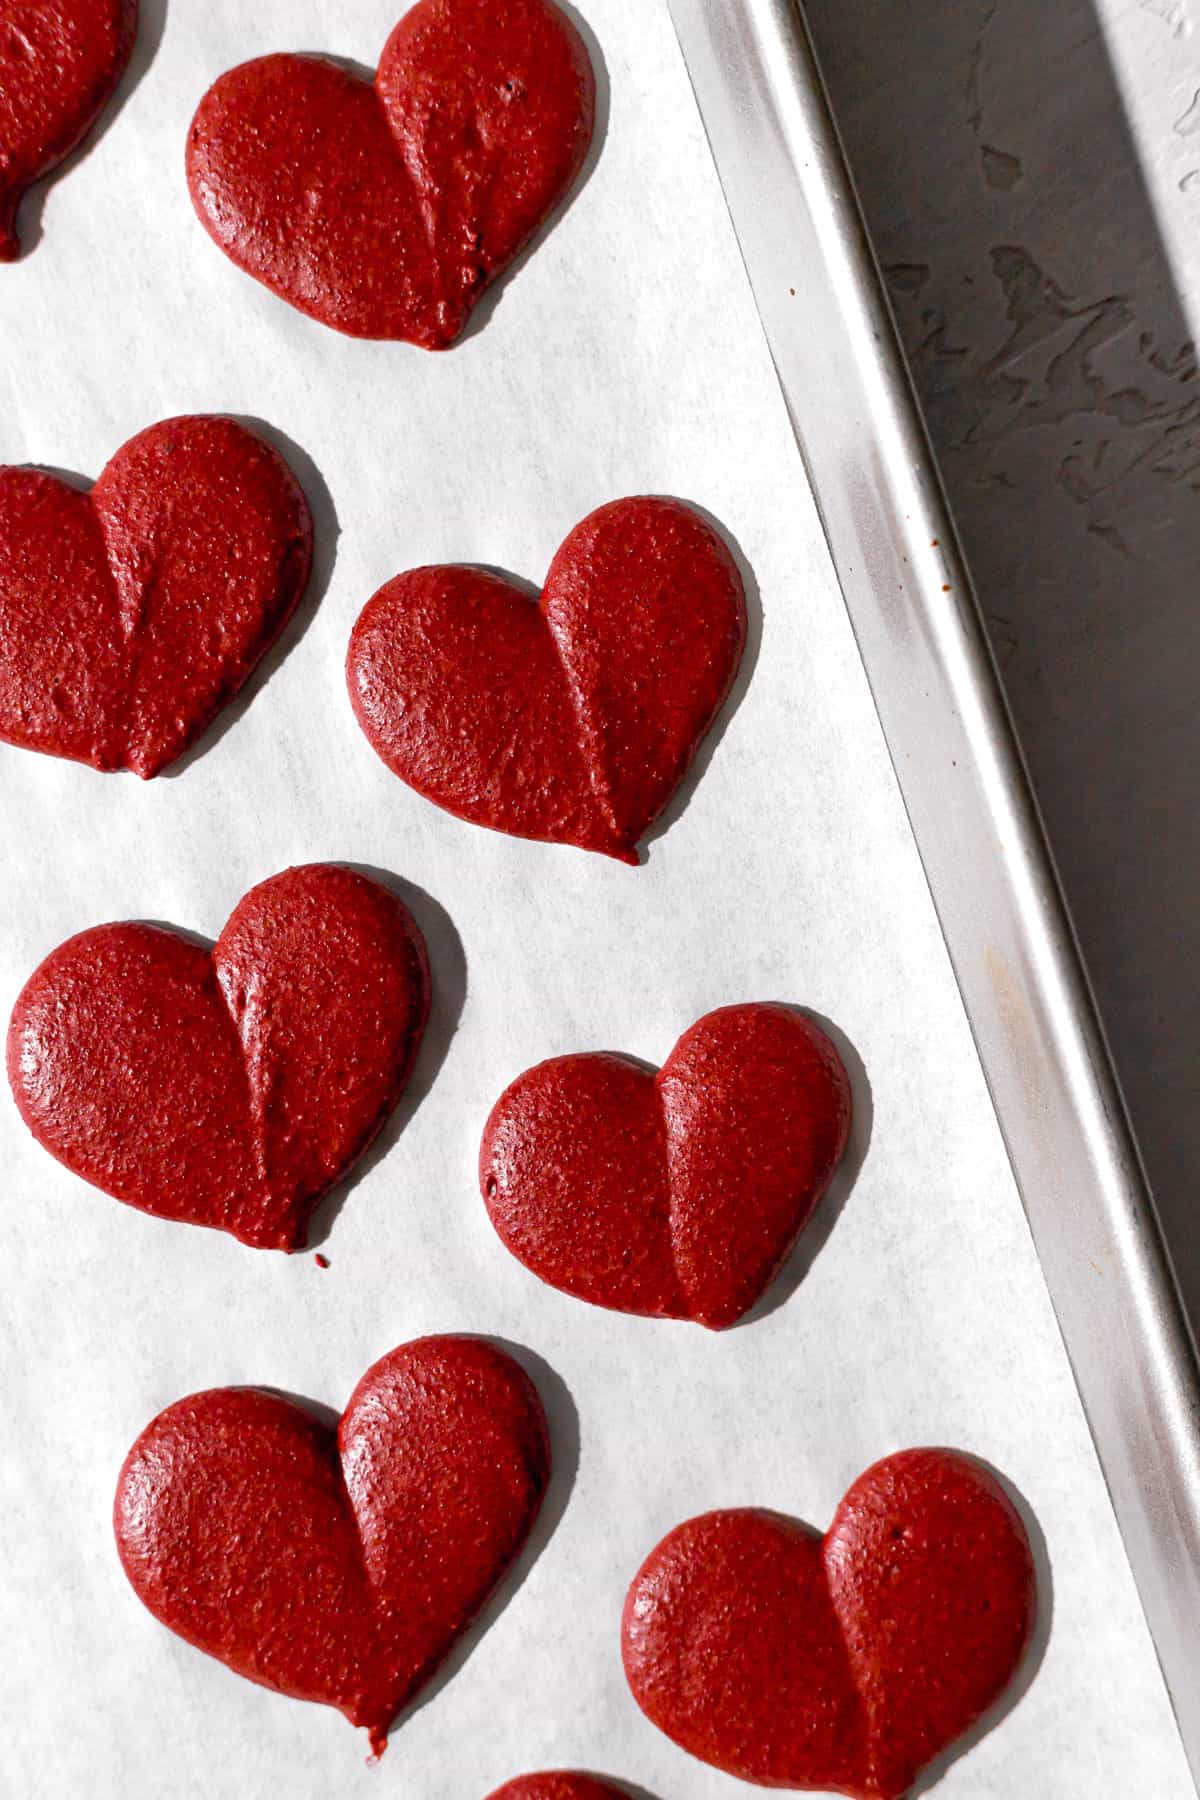 red macaron batter piped into heart shapes on baking sheet.